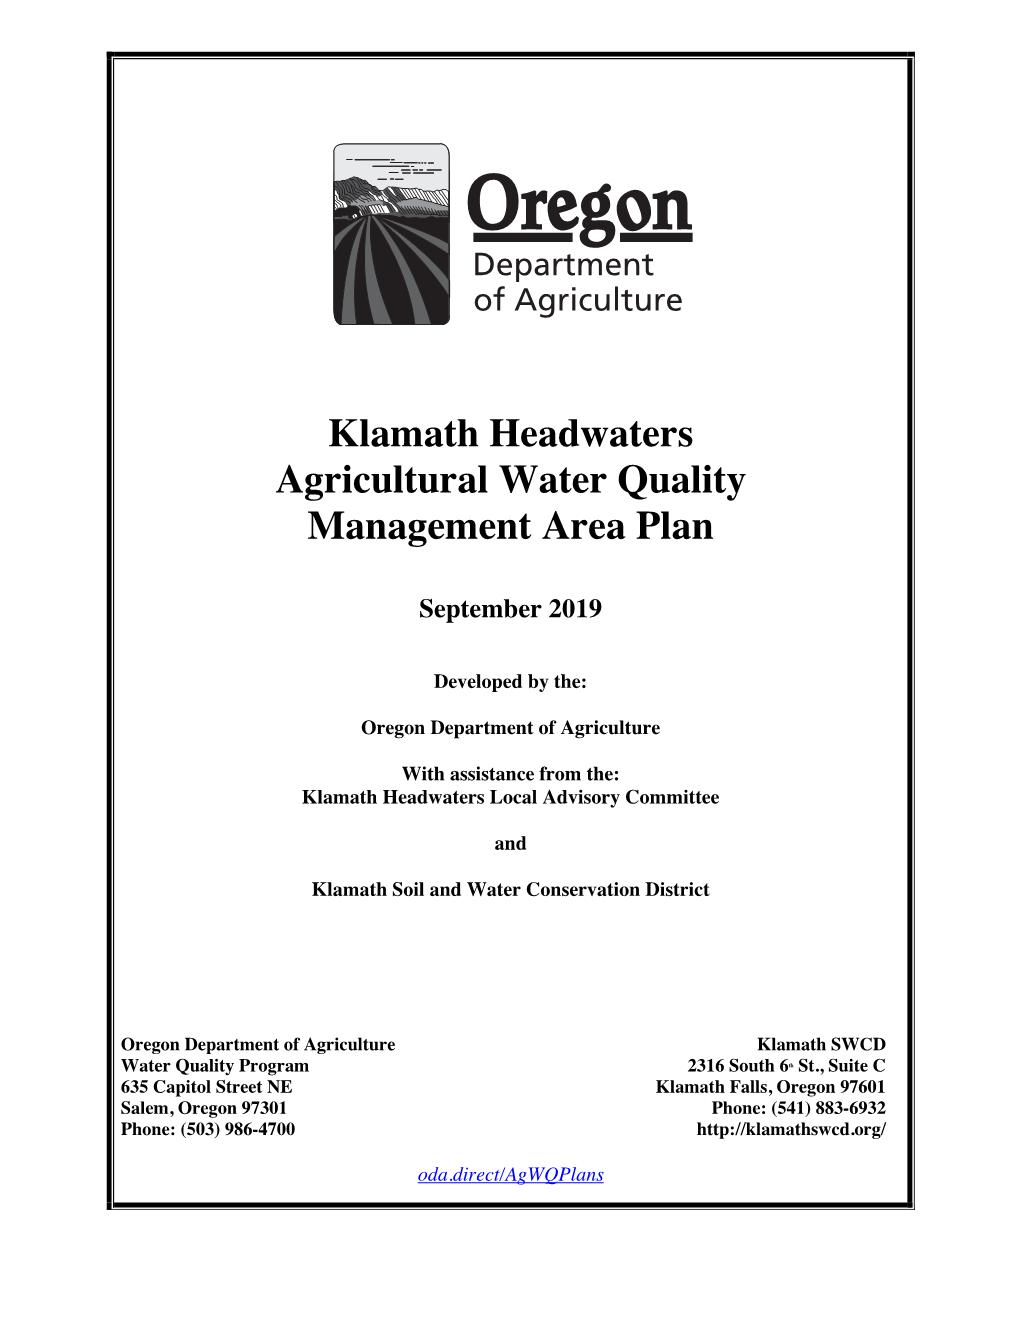 Klamath Headwaters Agricultural Water Quality Management Area Plan